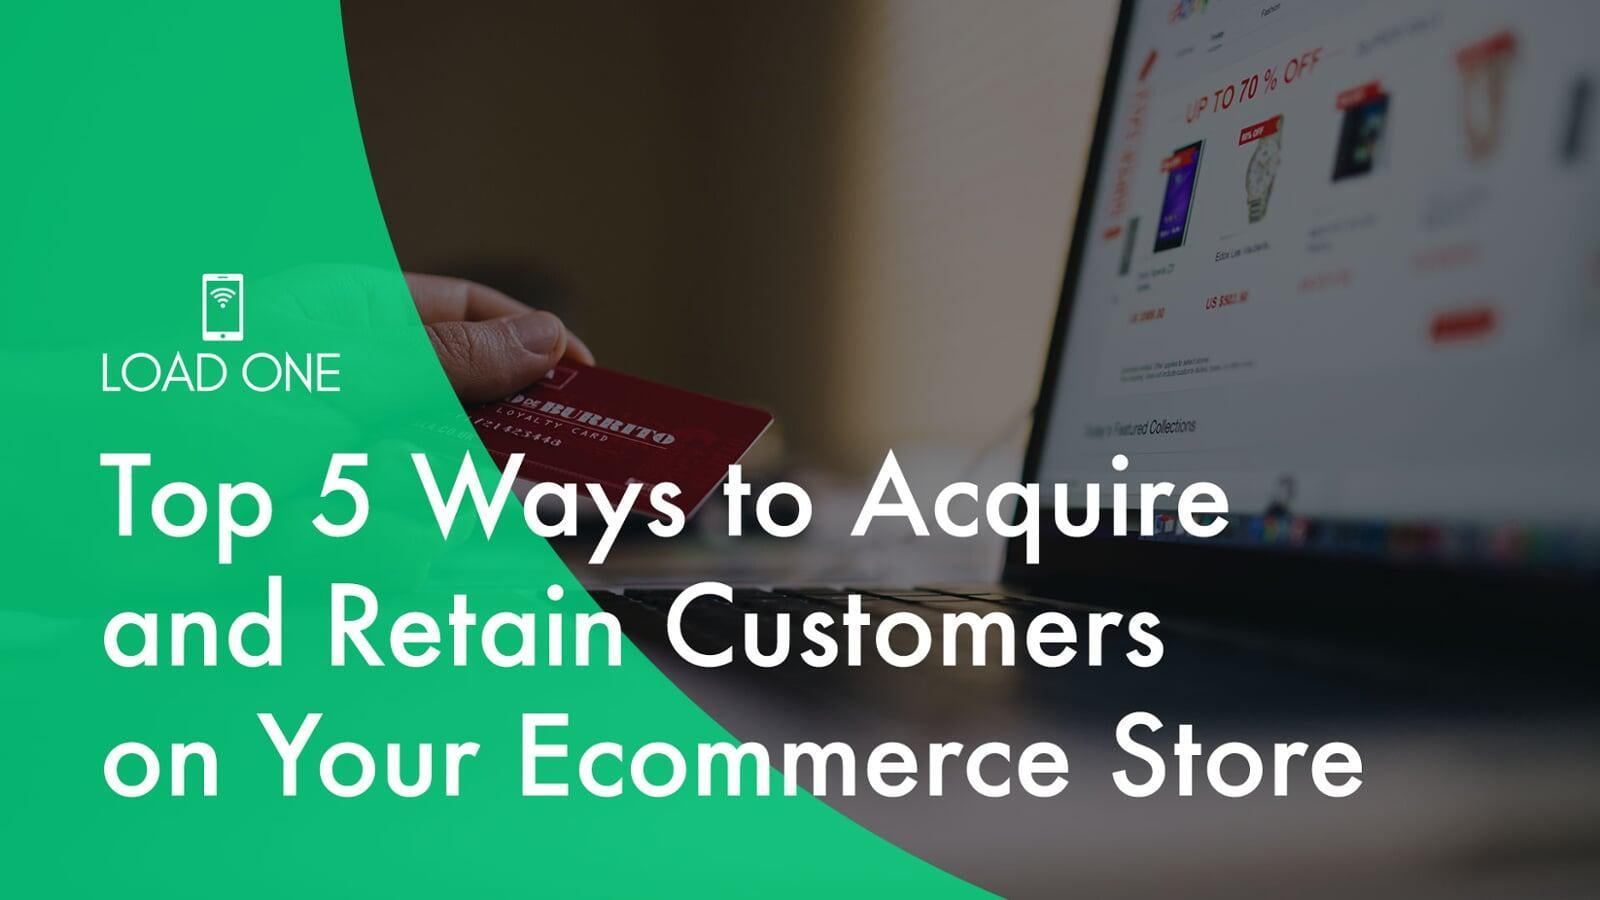 Top 5 Ways to Acquire and Retain Customers on Your Ecommerce Store